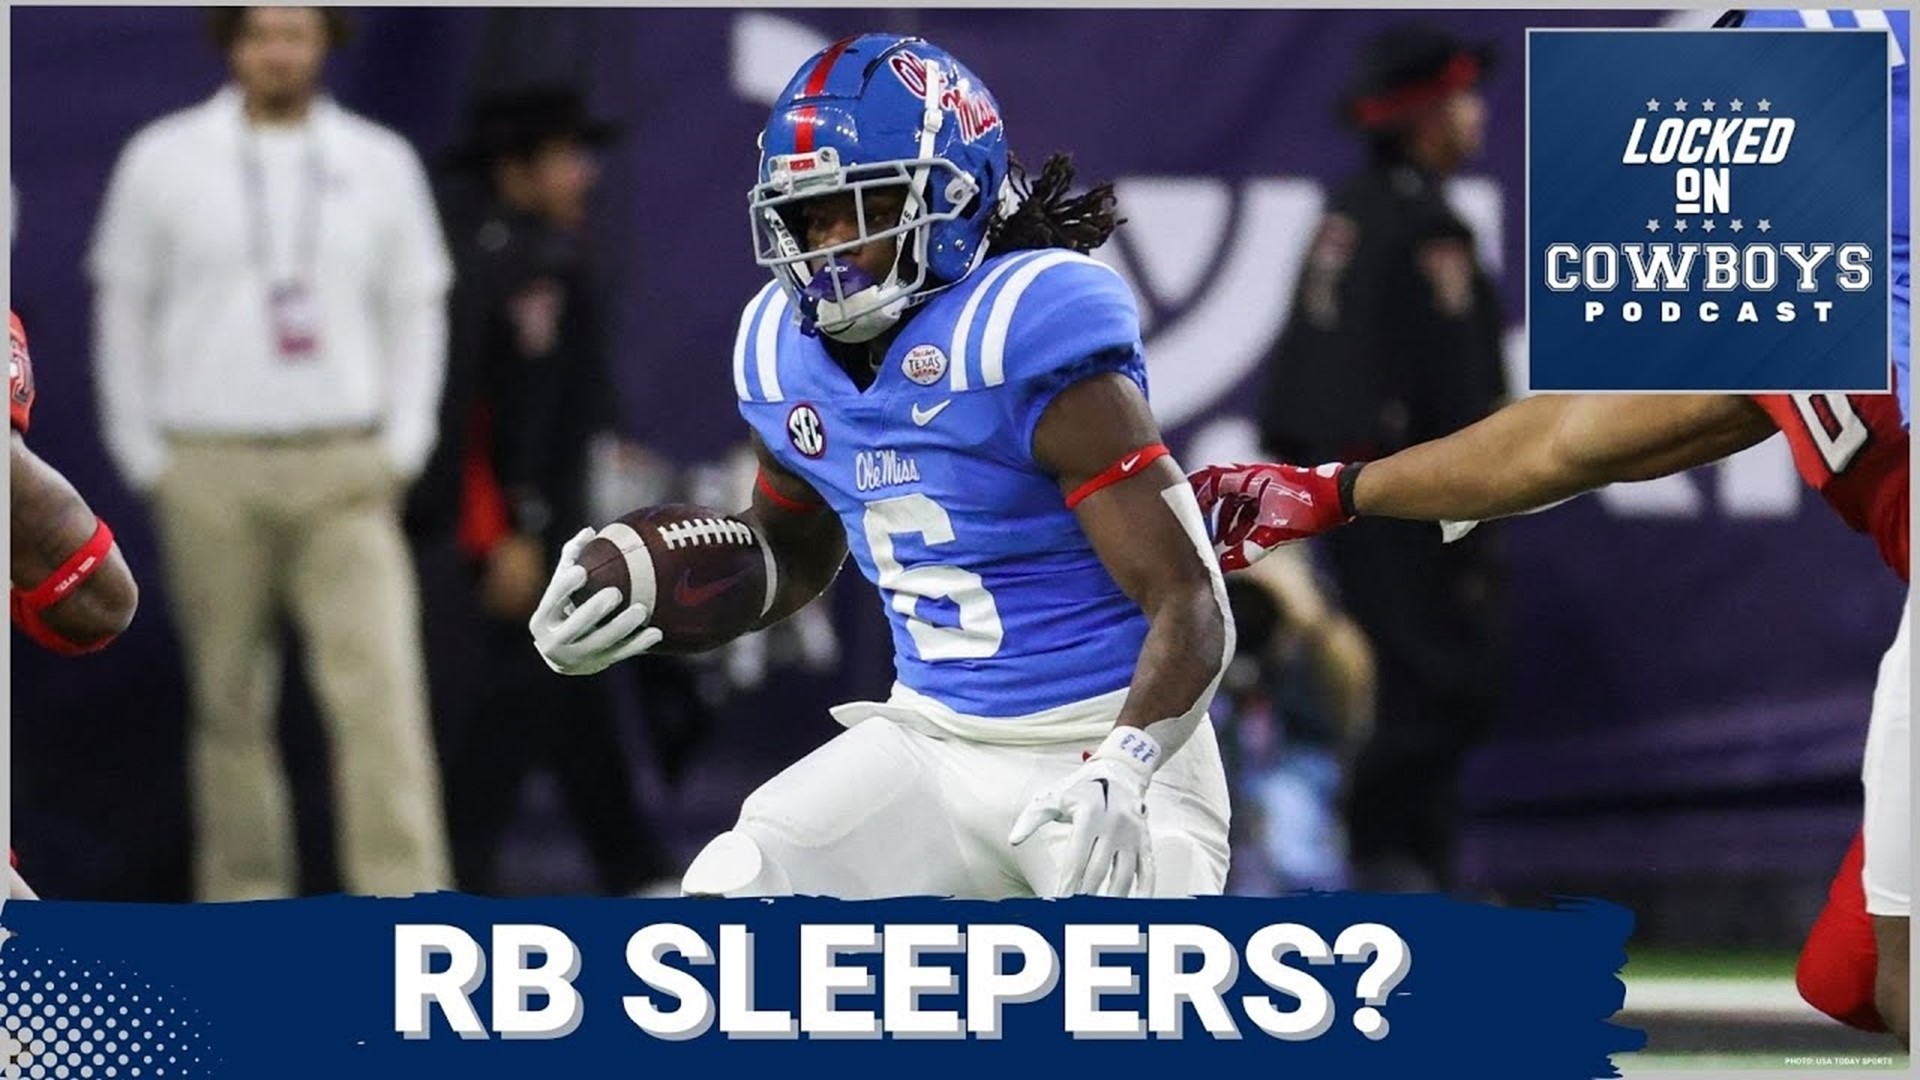 Marcus Mosher and Landon McCool discuss three mid-round running back prospects the Dallas Cowboys could consider in the 2023 NFL Draft.